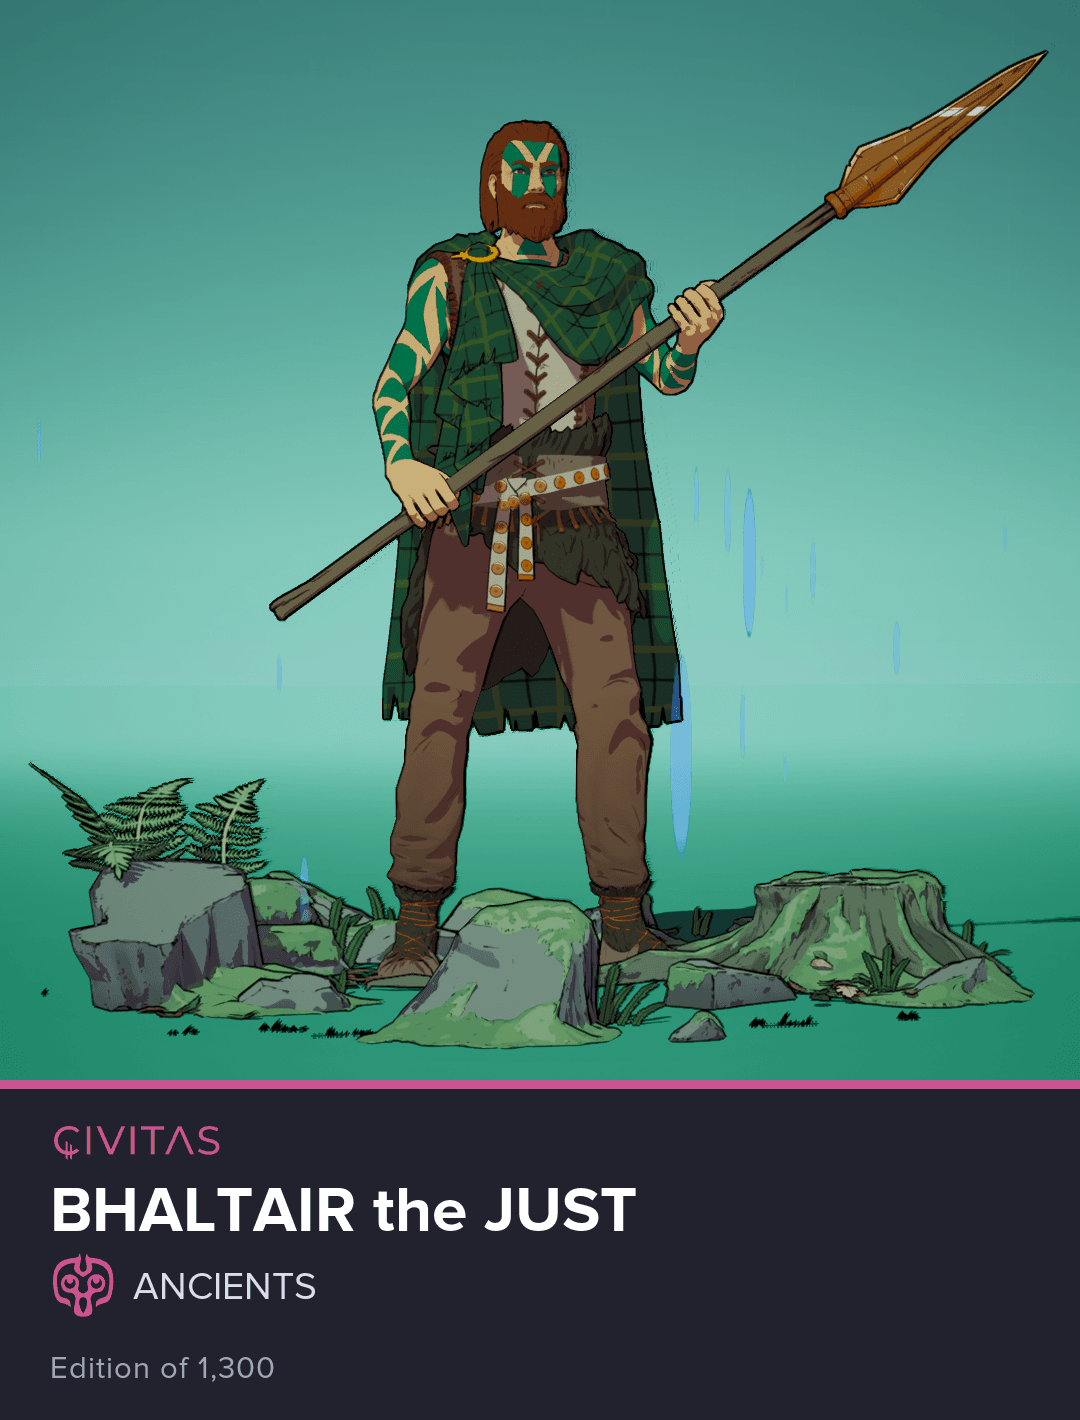 Bhaltair the Just #683